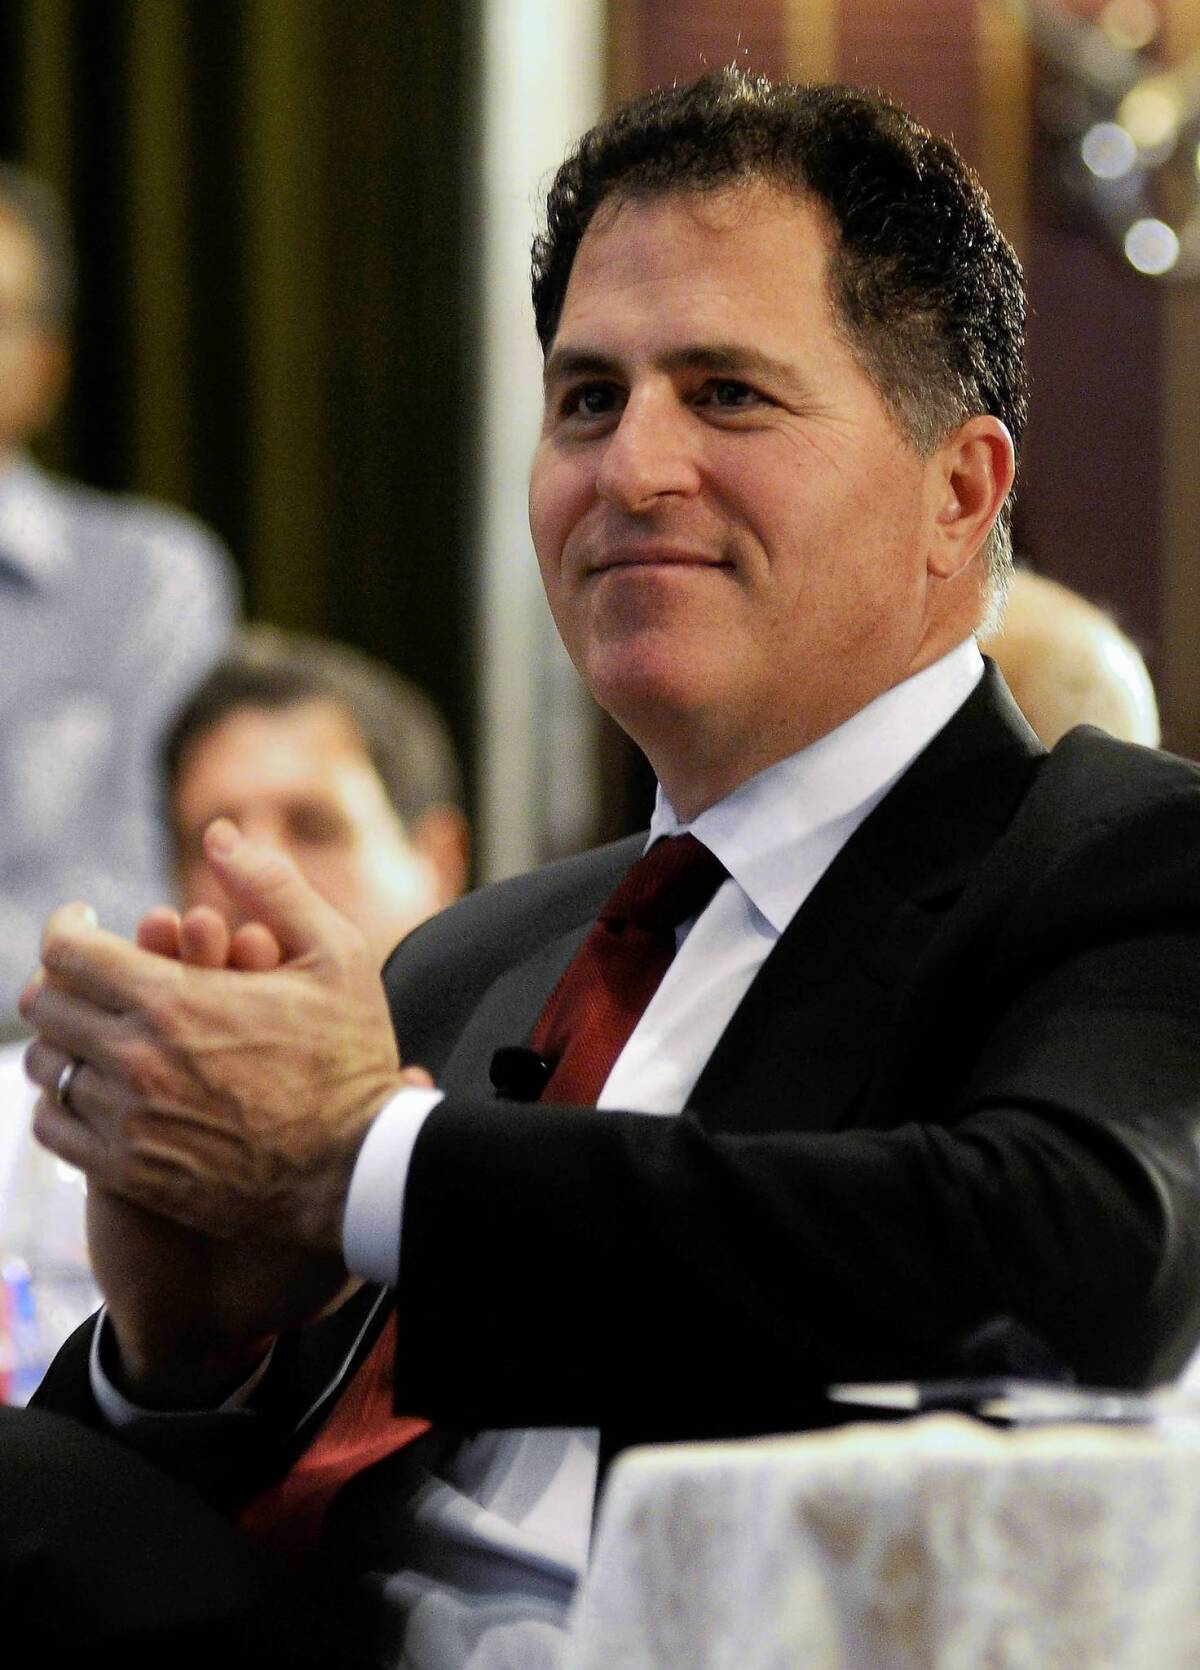 The L.A. Times reported that billionaire computer magnate Michael Dell, shown, had avoided reassessment when he purchased a Santa Monica hotel for $200 million by bringing his wife and two business associates in on the deal.